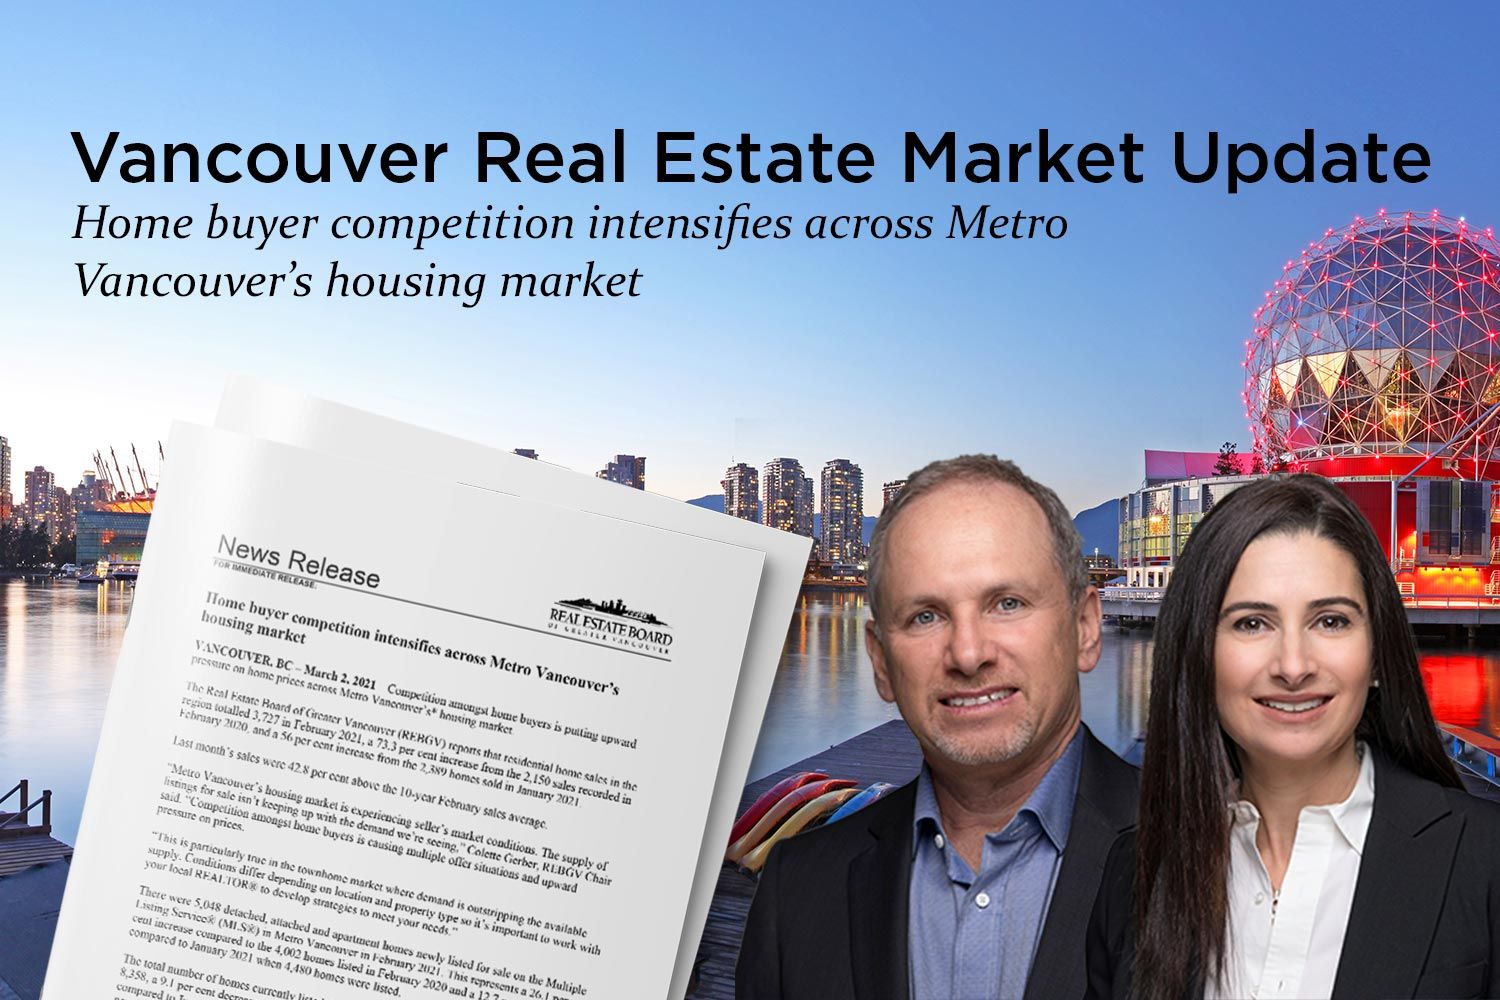 Home buyer competition intensifies across Metro Vancouver’s housing market